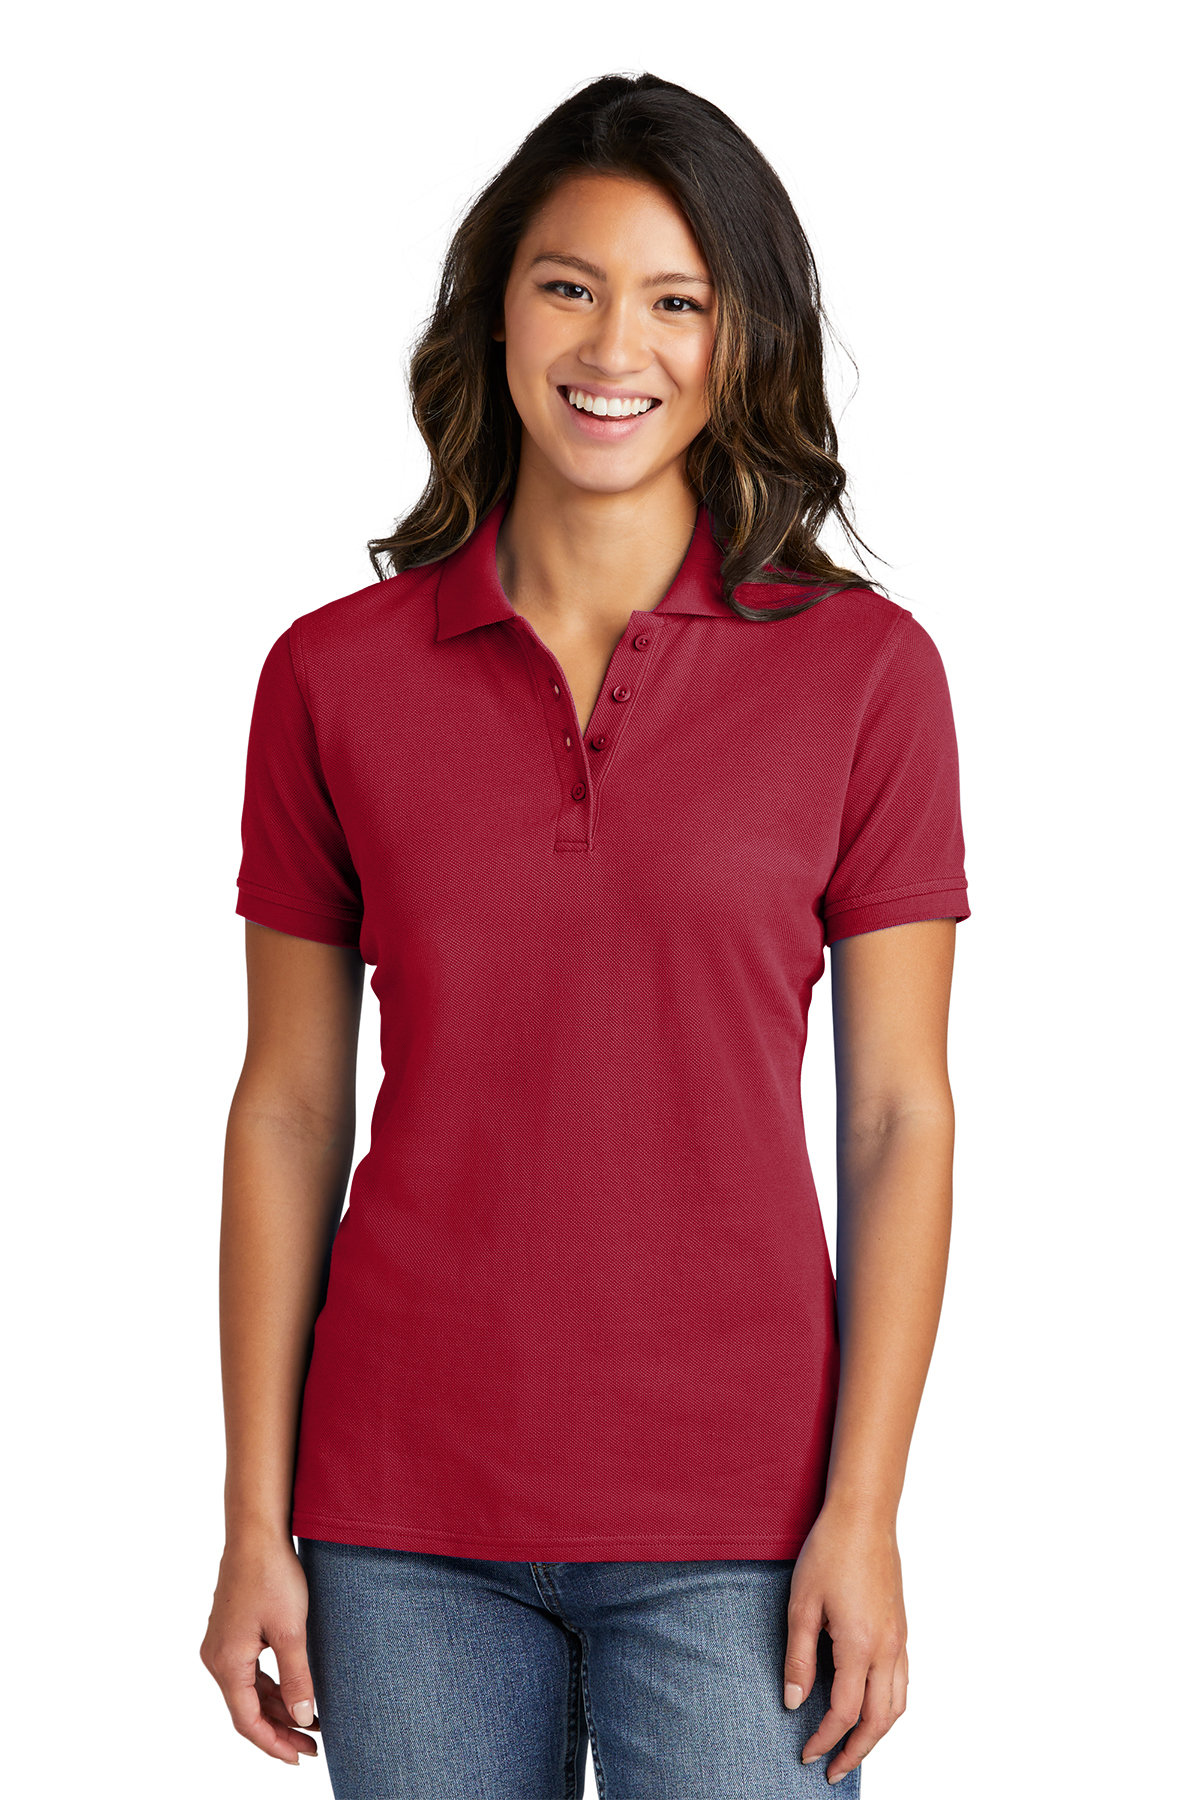 Port & Company Ladies Combed Ring Spun Pique Polo | Product | Company ...